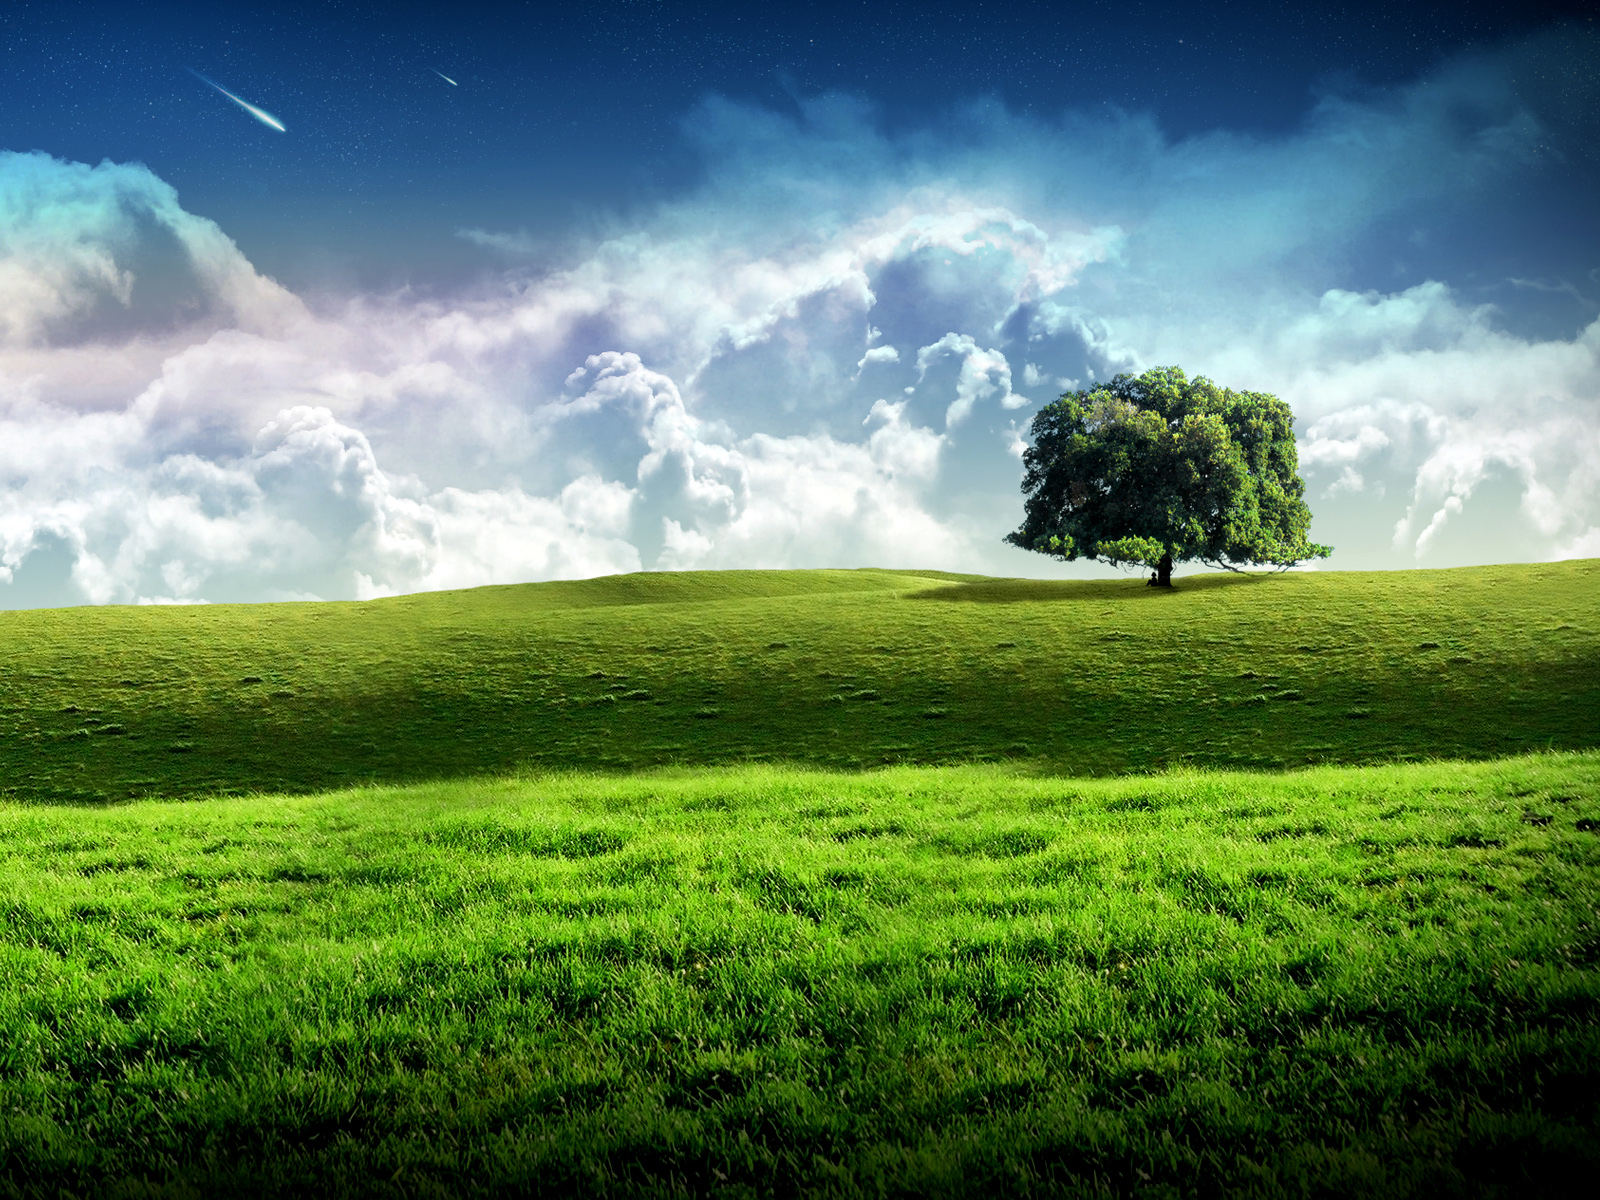 Desktop wallpaper with high-definition scenery.